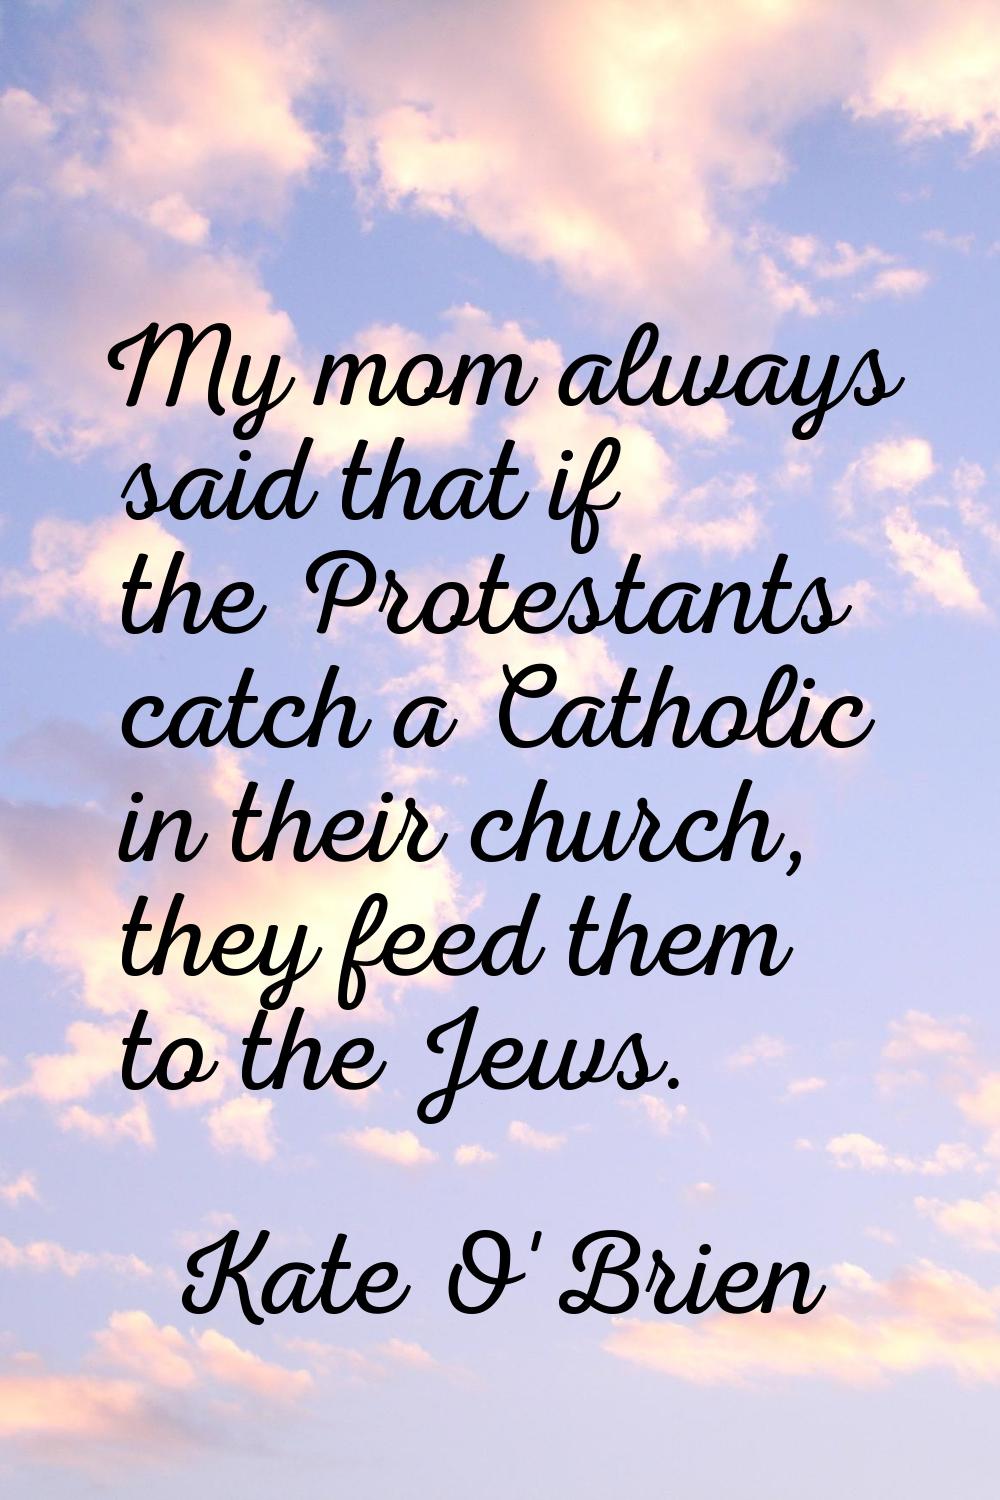 My mom always said that if the Protestants catch a Catholic in their church, they feed them to the 